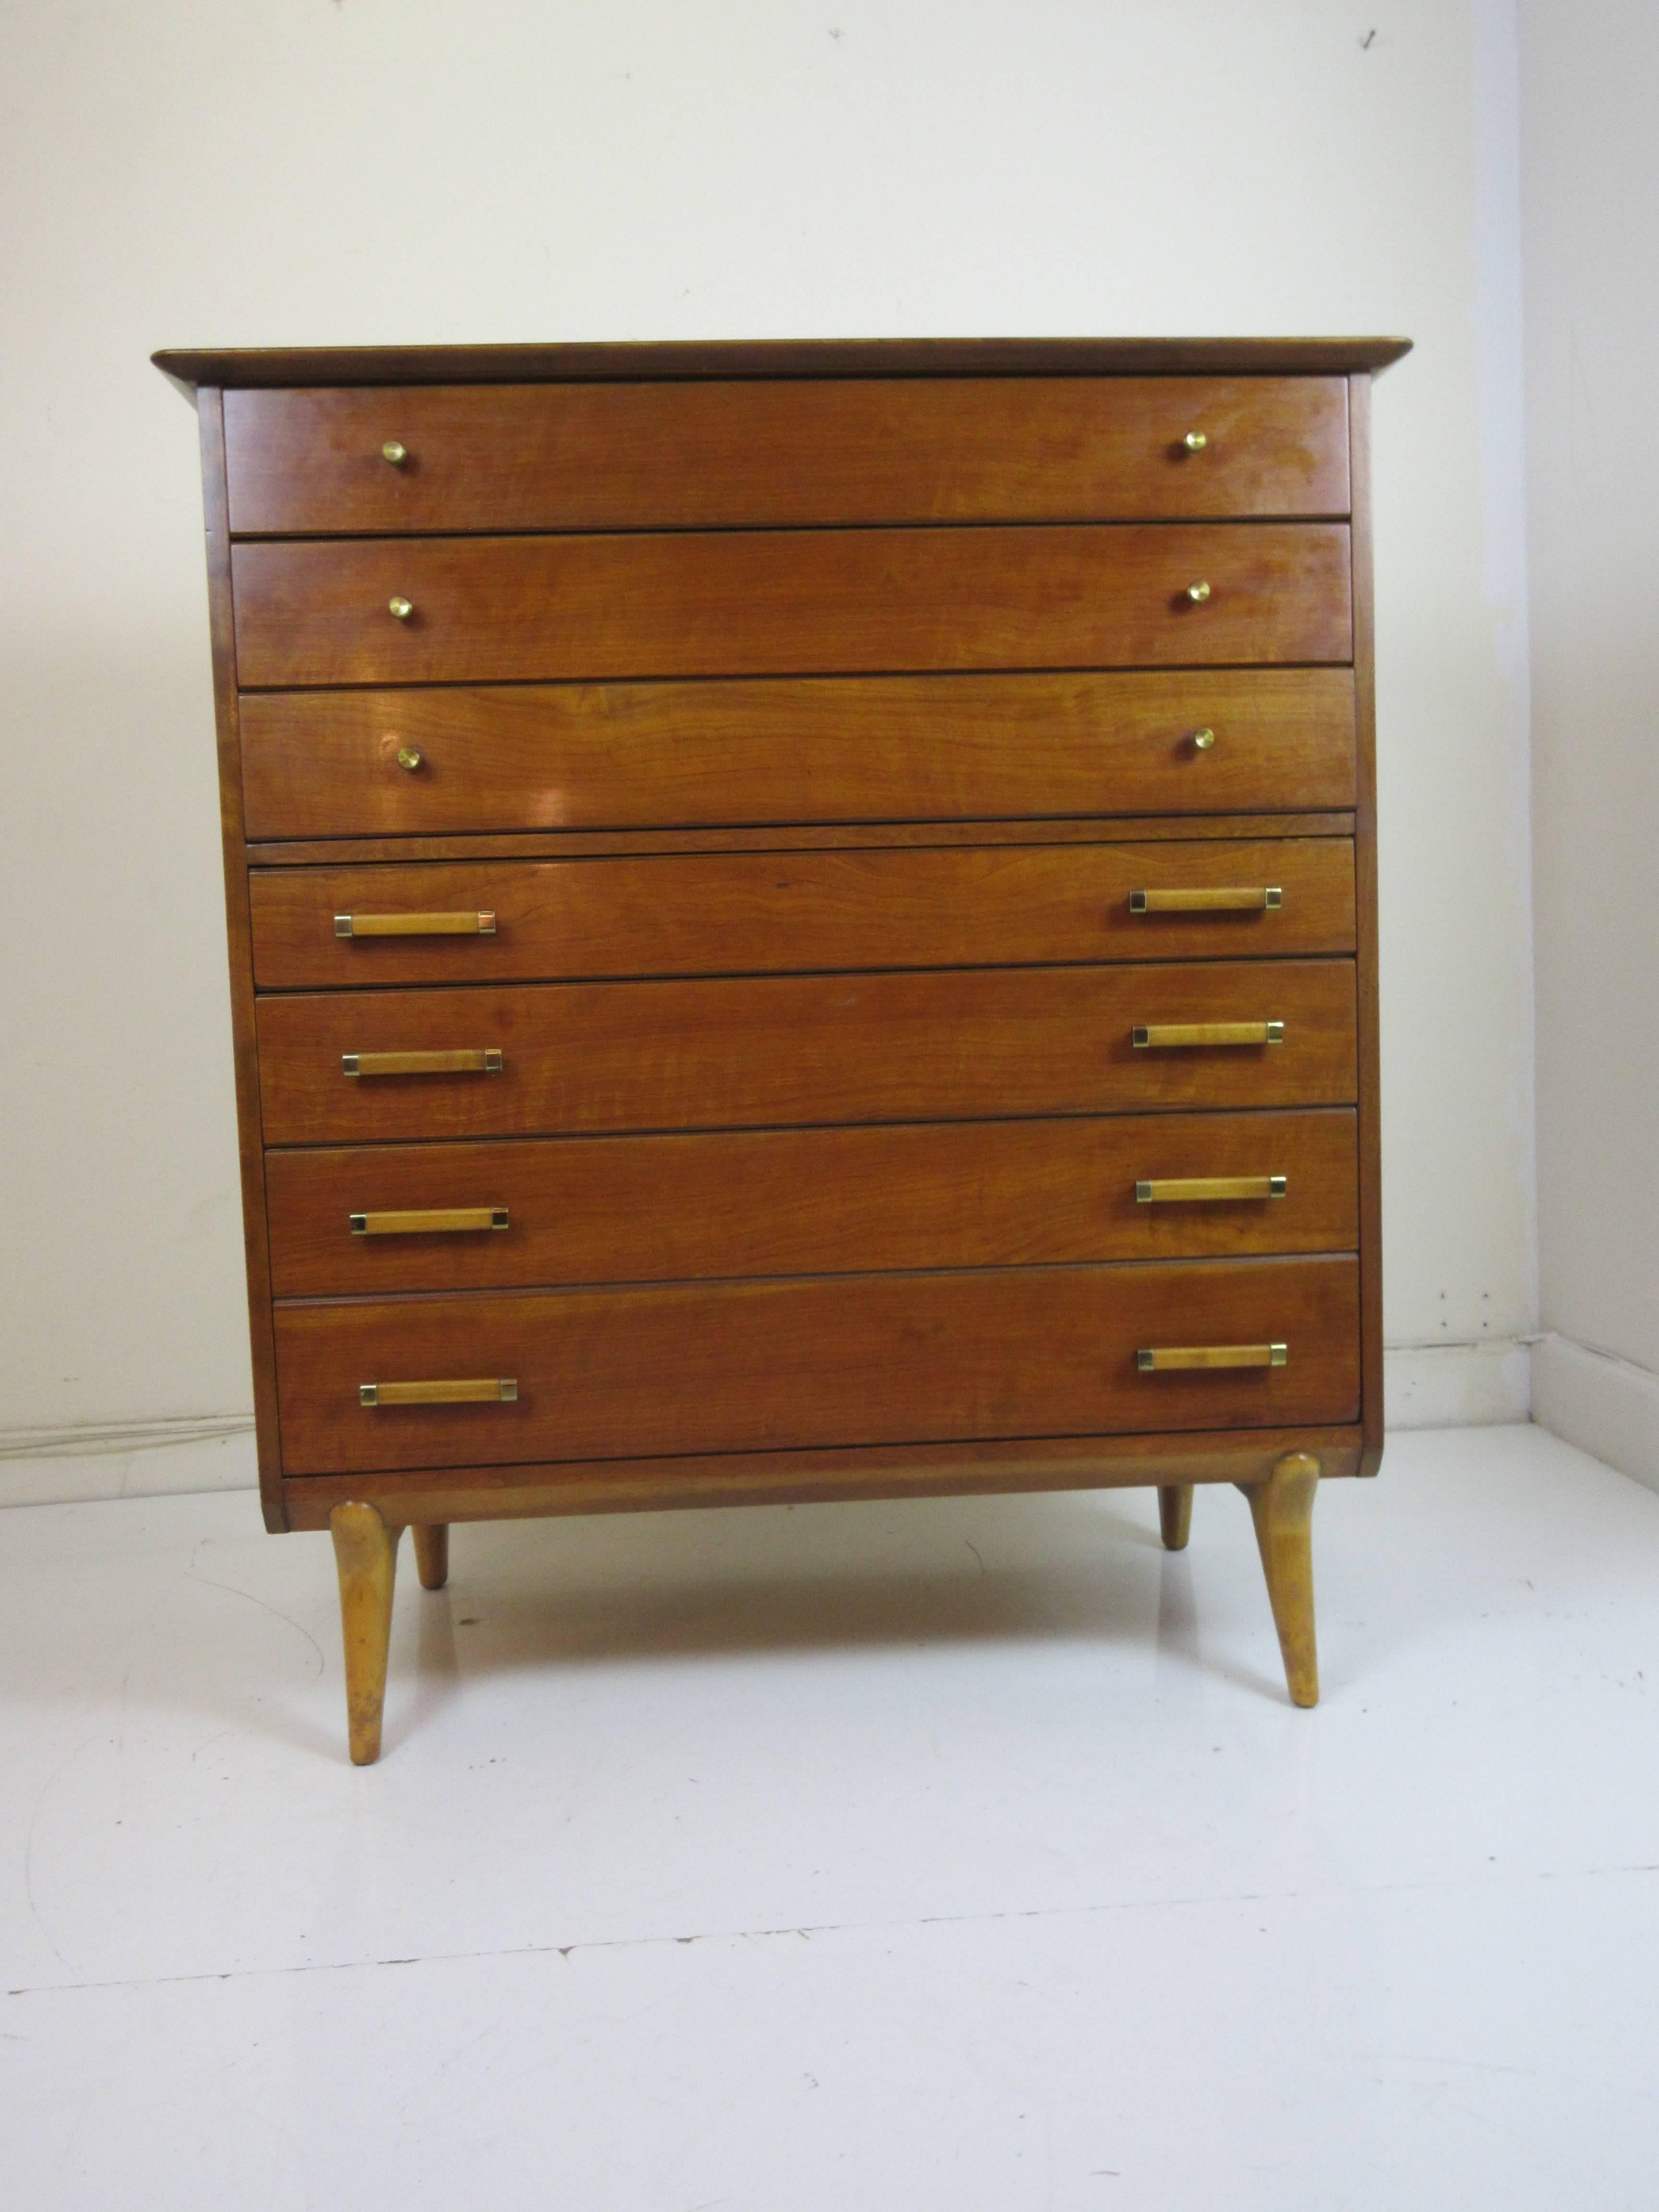 Renzo Rutili for John Stuart high chest of drawers. Rutili's chest with Italian style legs matches a long low dresser and a pair of nightstands we have from the original owners making a complete set if desired. Pulls are of all brass or brass and